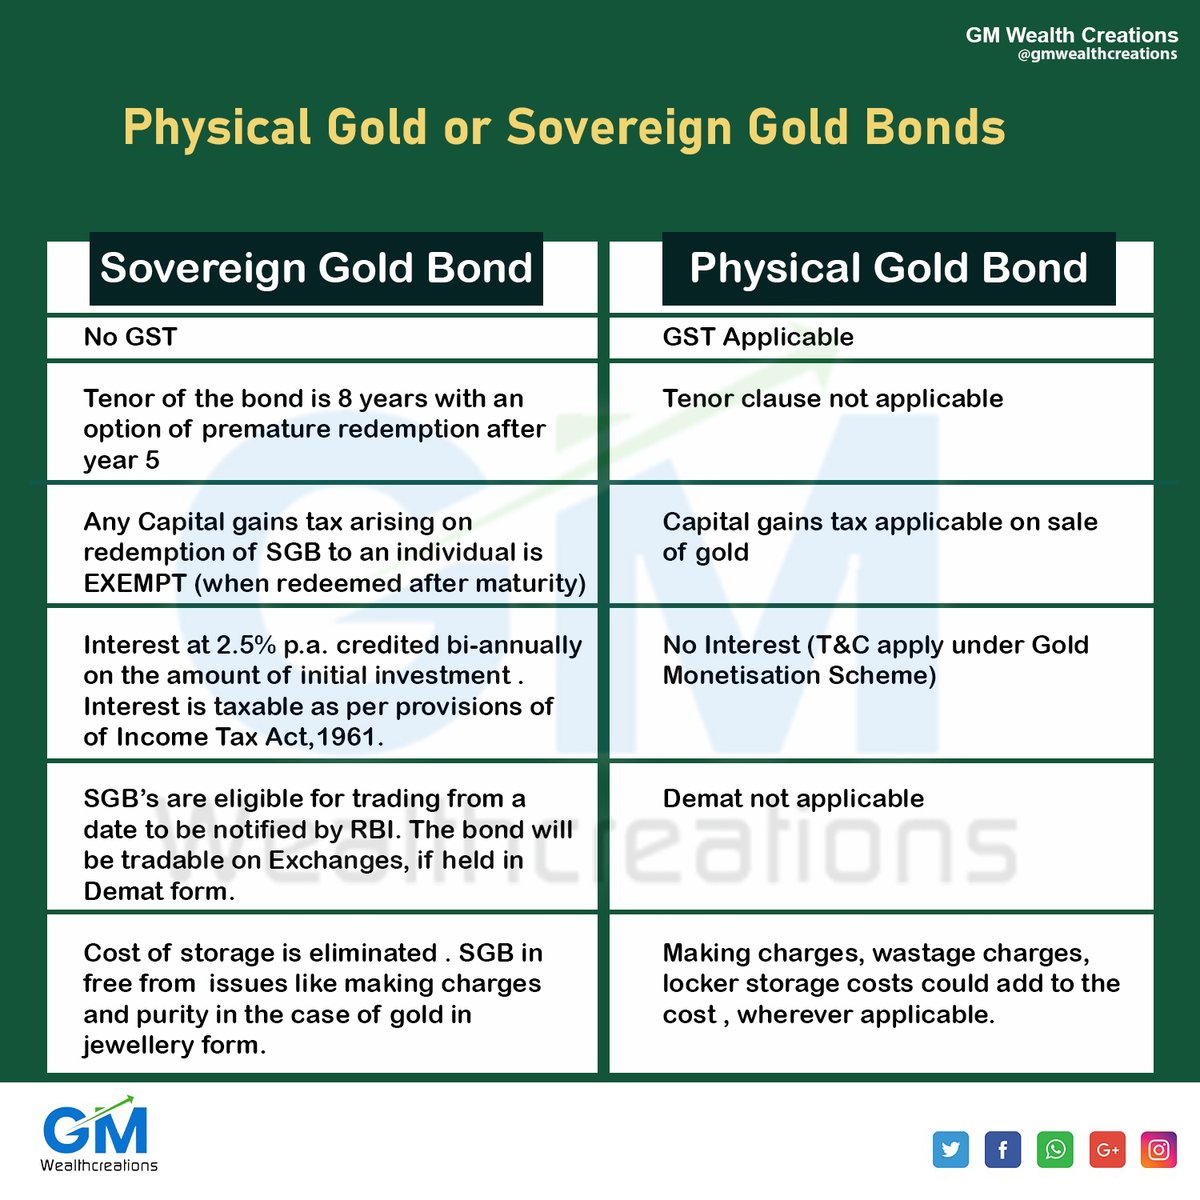 Physical Gold or Sovereign Gold Bonds

@gmwealthcreations
#gmwealthcreations #optionstrading #stockmarketindia #physicalgold #sovereigngold
#Updates